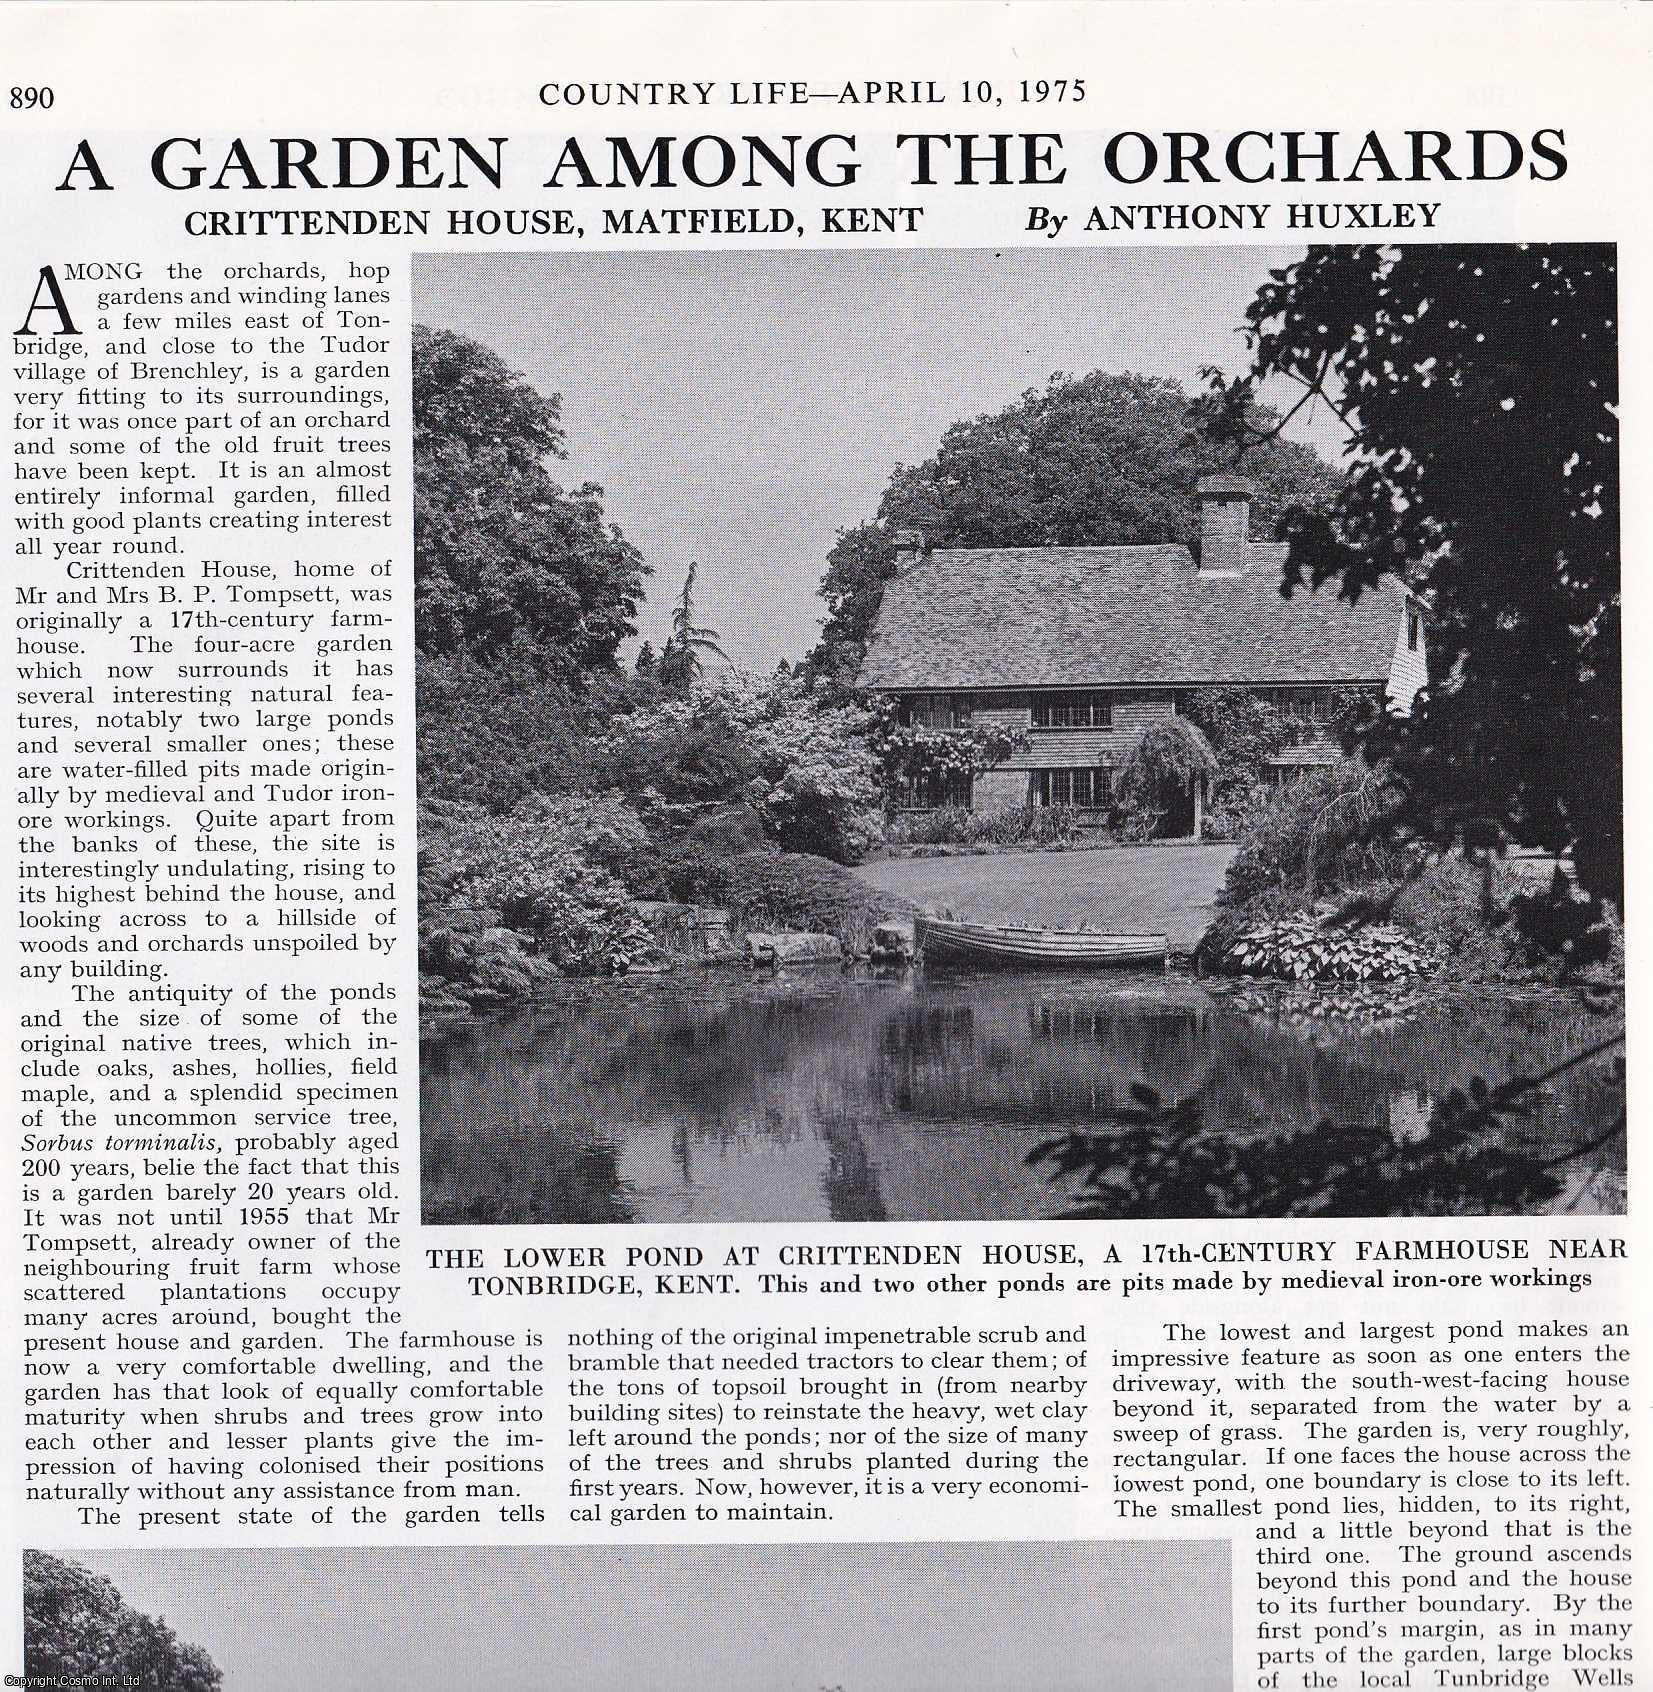 Anthony Huxley - Crittenden House, Matfield, Kent; a Garden among the Orchards. Several pictures and accompanying text, removed from an original issue of Country Life Magazine, 1975.